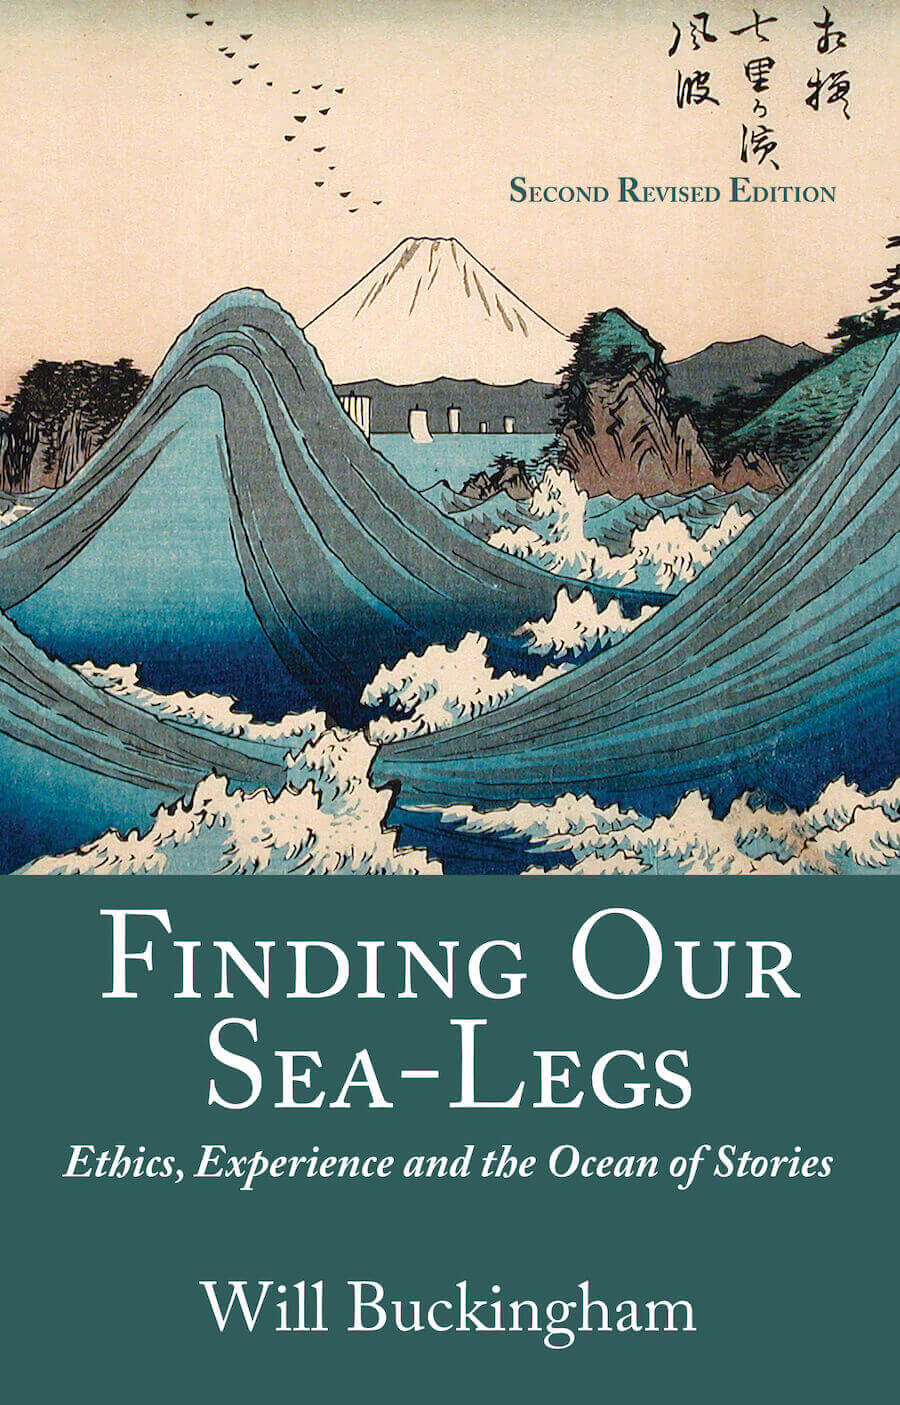 Finding Our Sea-Legs: Cover